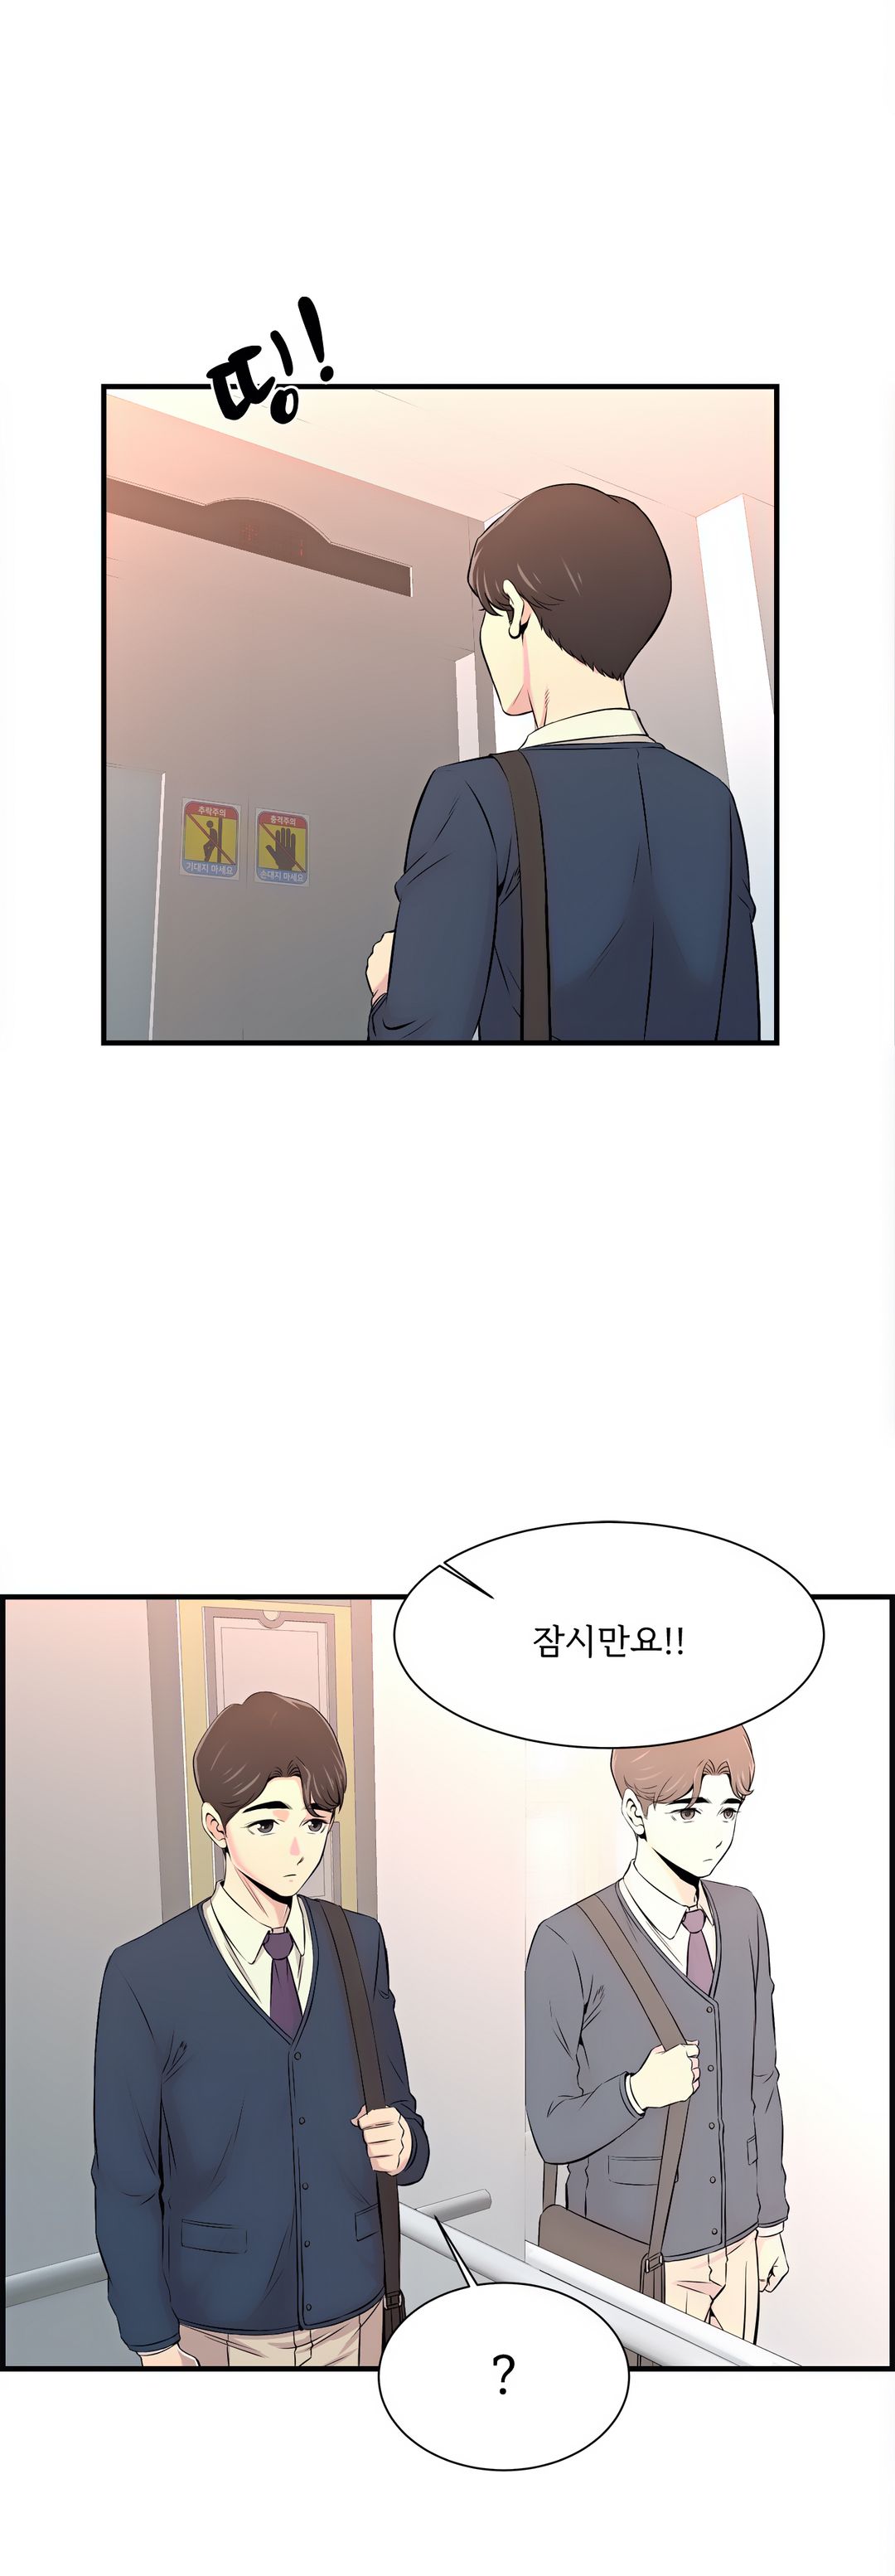 Cram School Scandal Raw - Chapter 13 Page 2